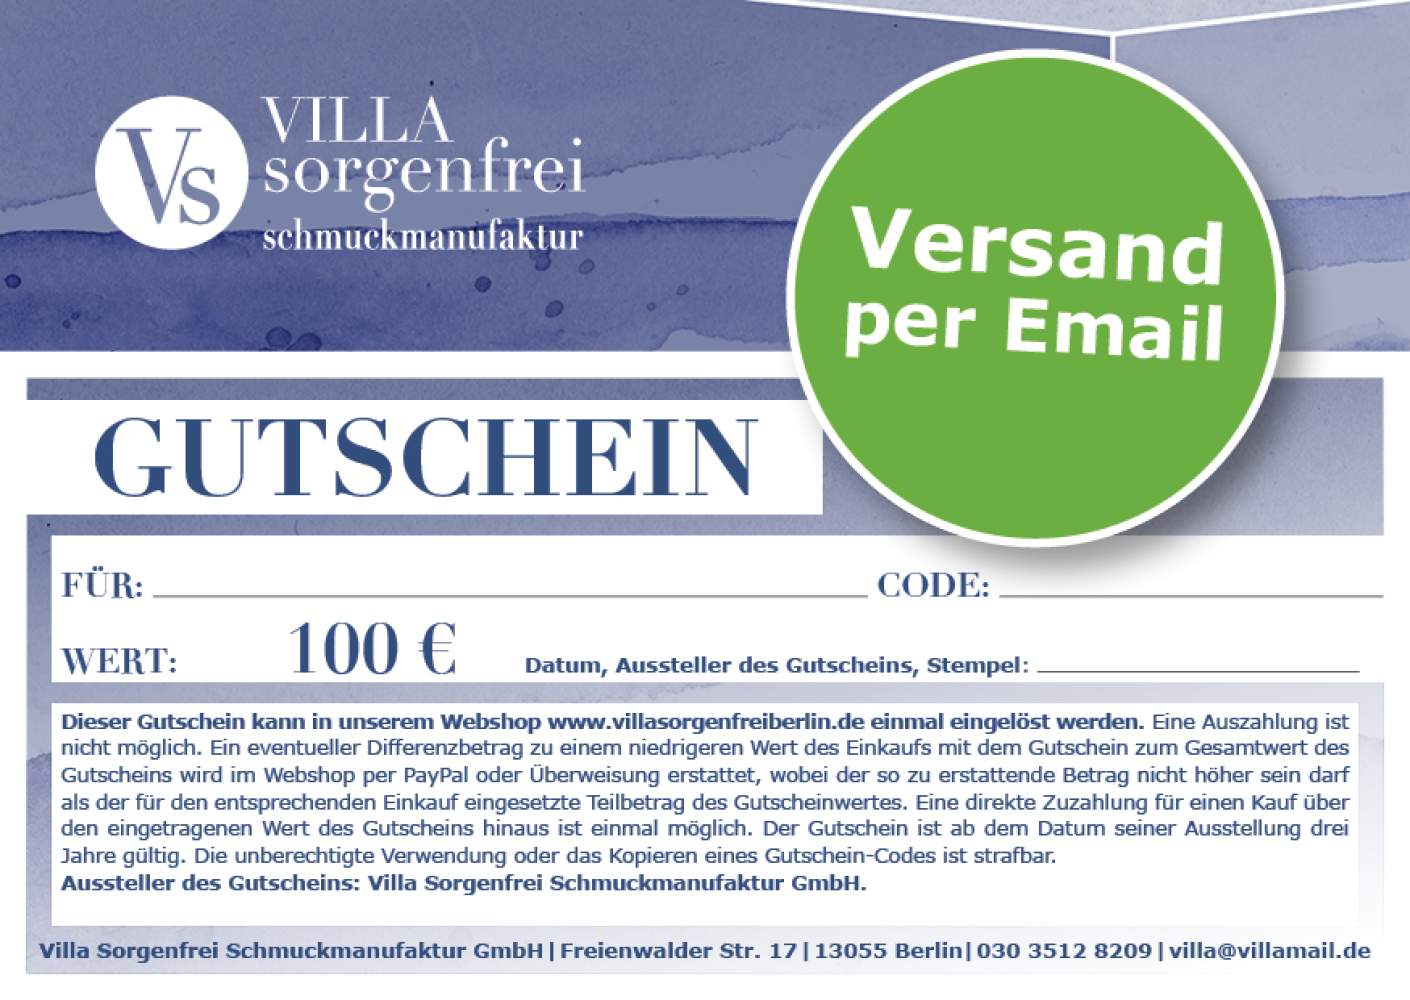 Email Gift Vouchers €100